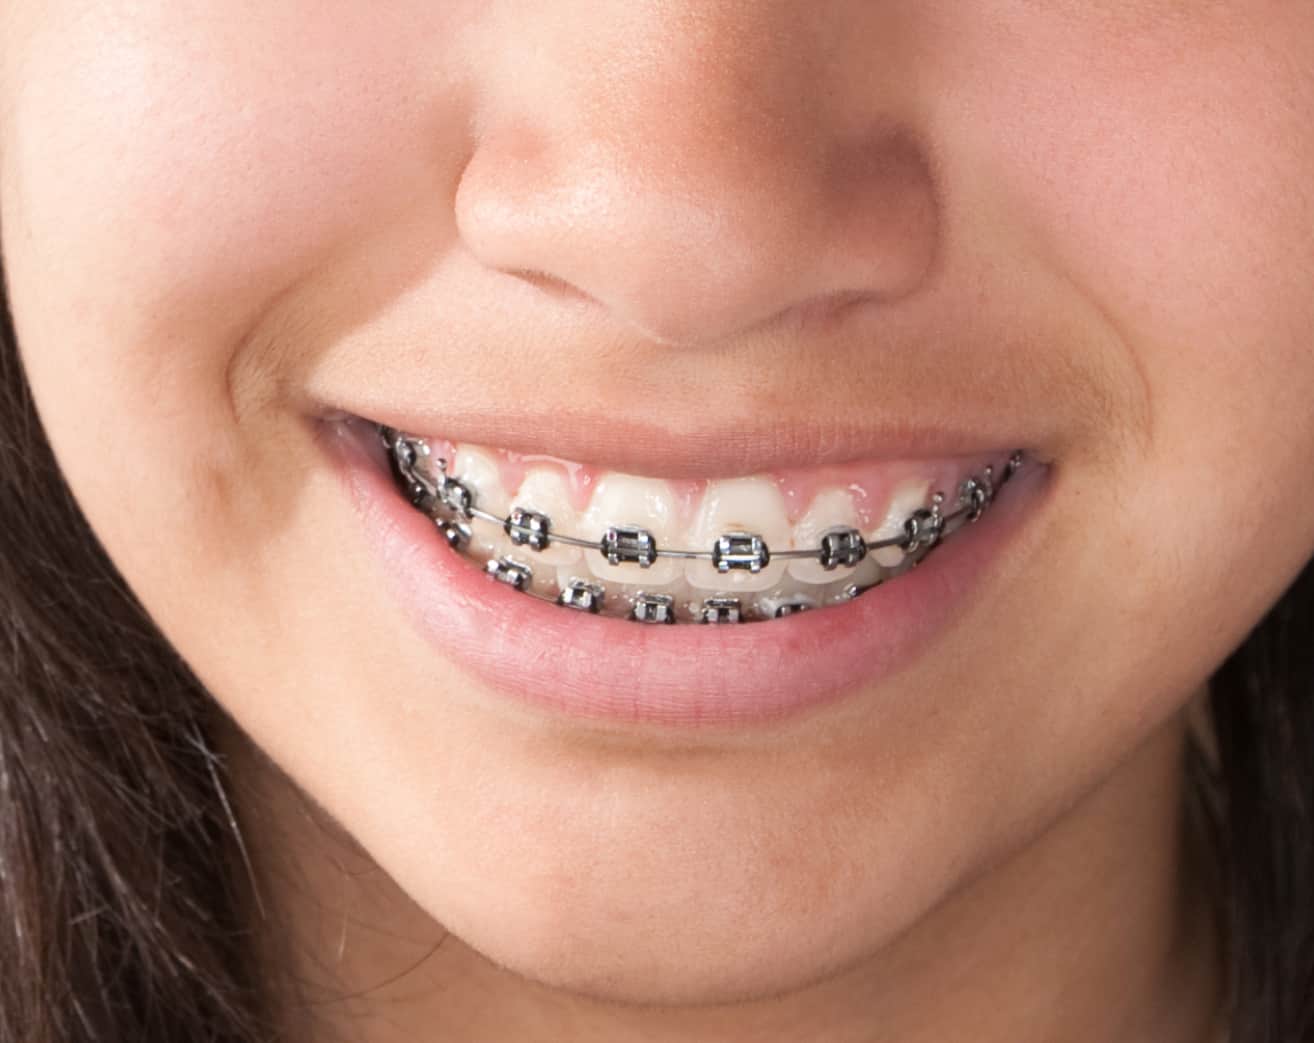 metal braces are part of our orthodontic services at Prestige Orthodontics